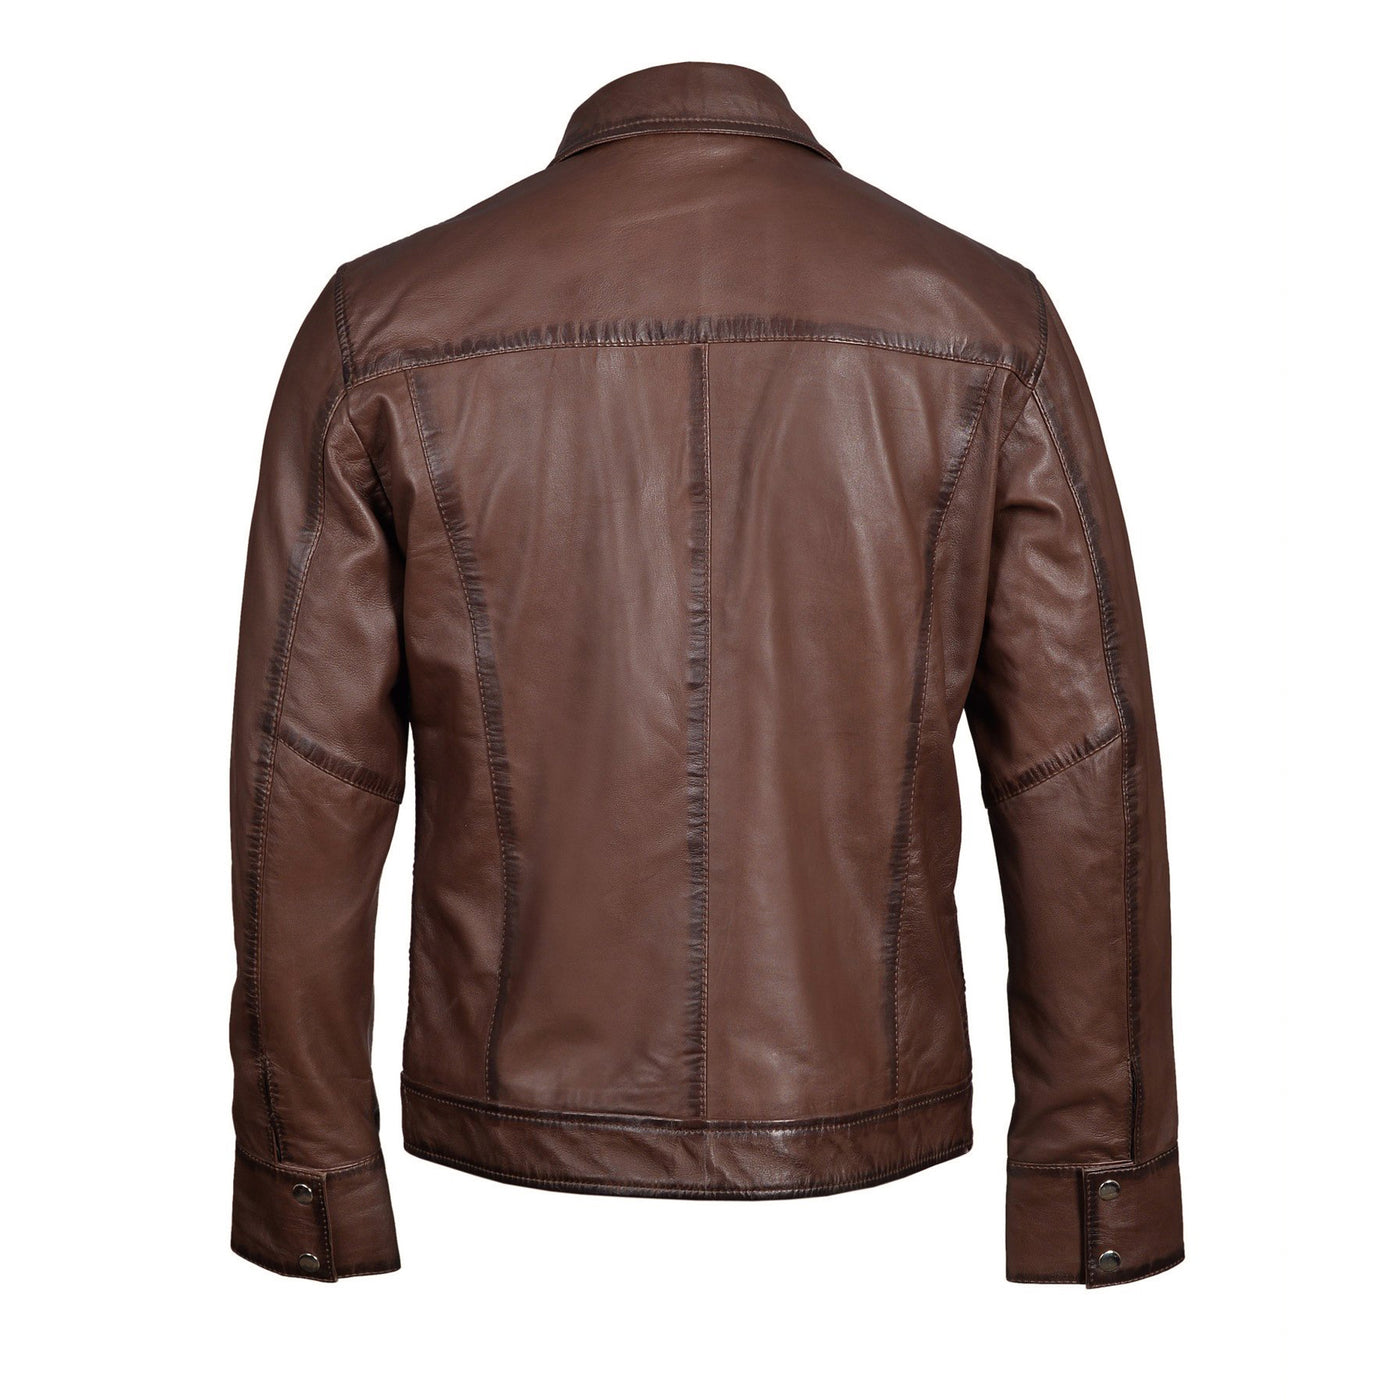 lightweight Thatchers Leather jacket hand waxed